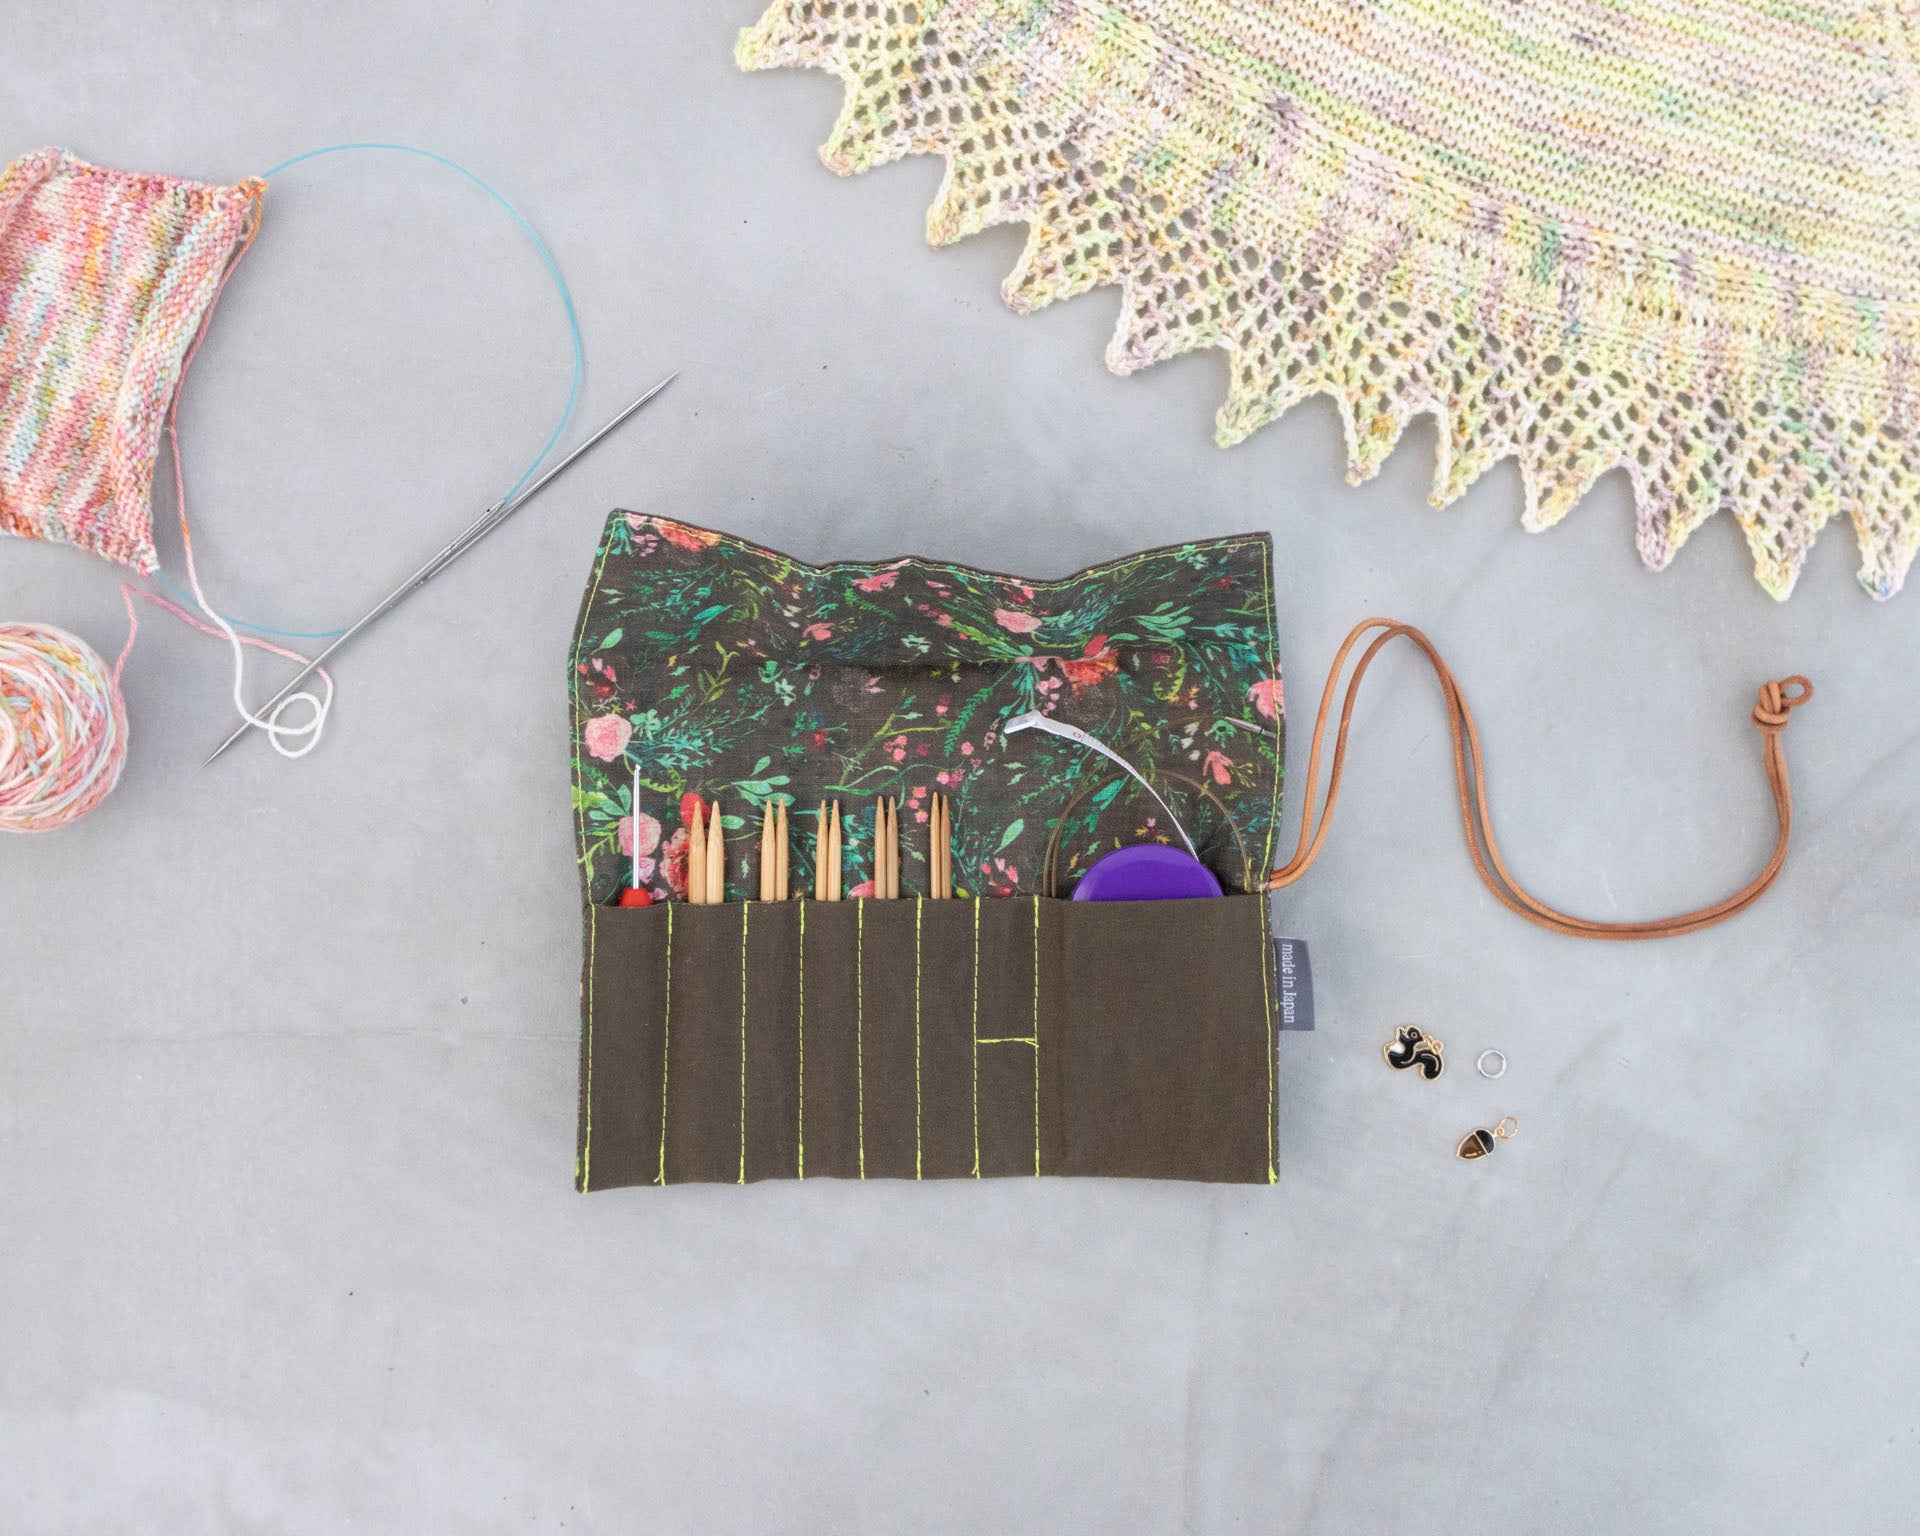 [sewing kit] 1Project Needle Case kit